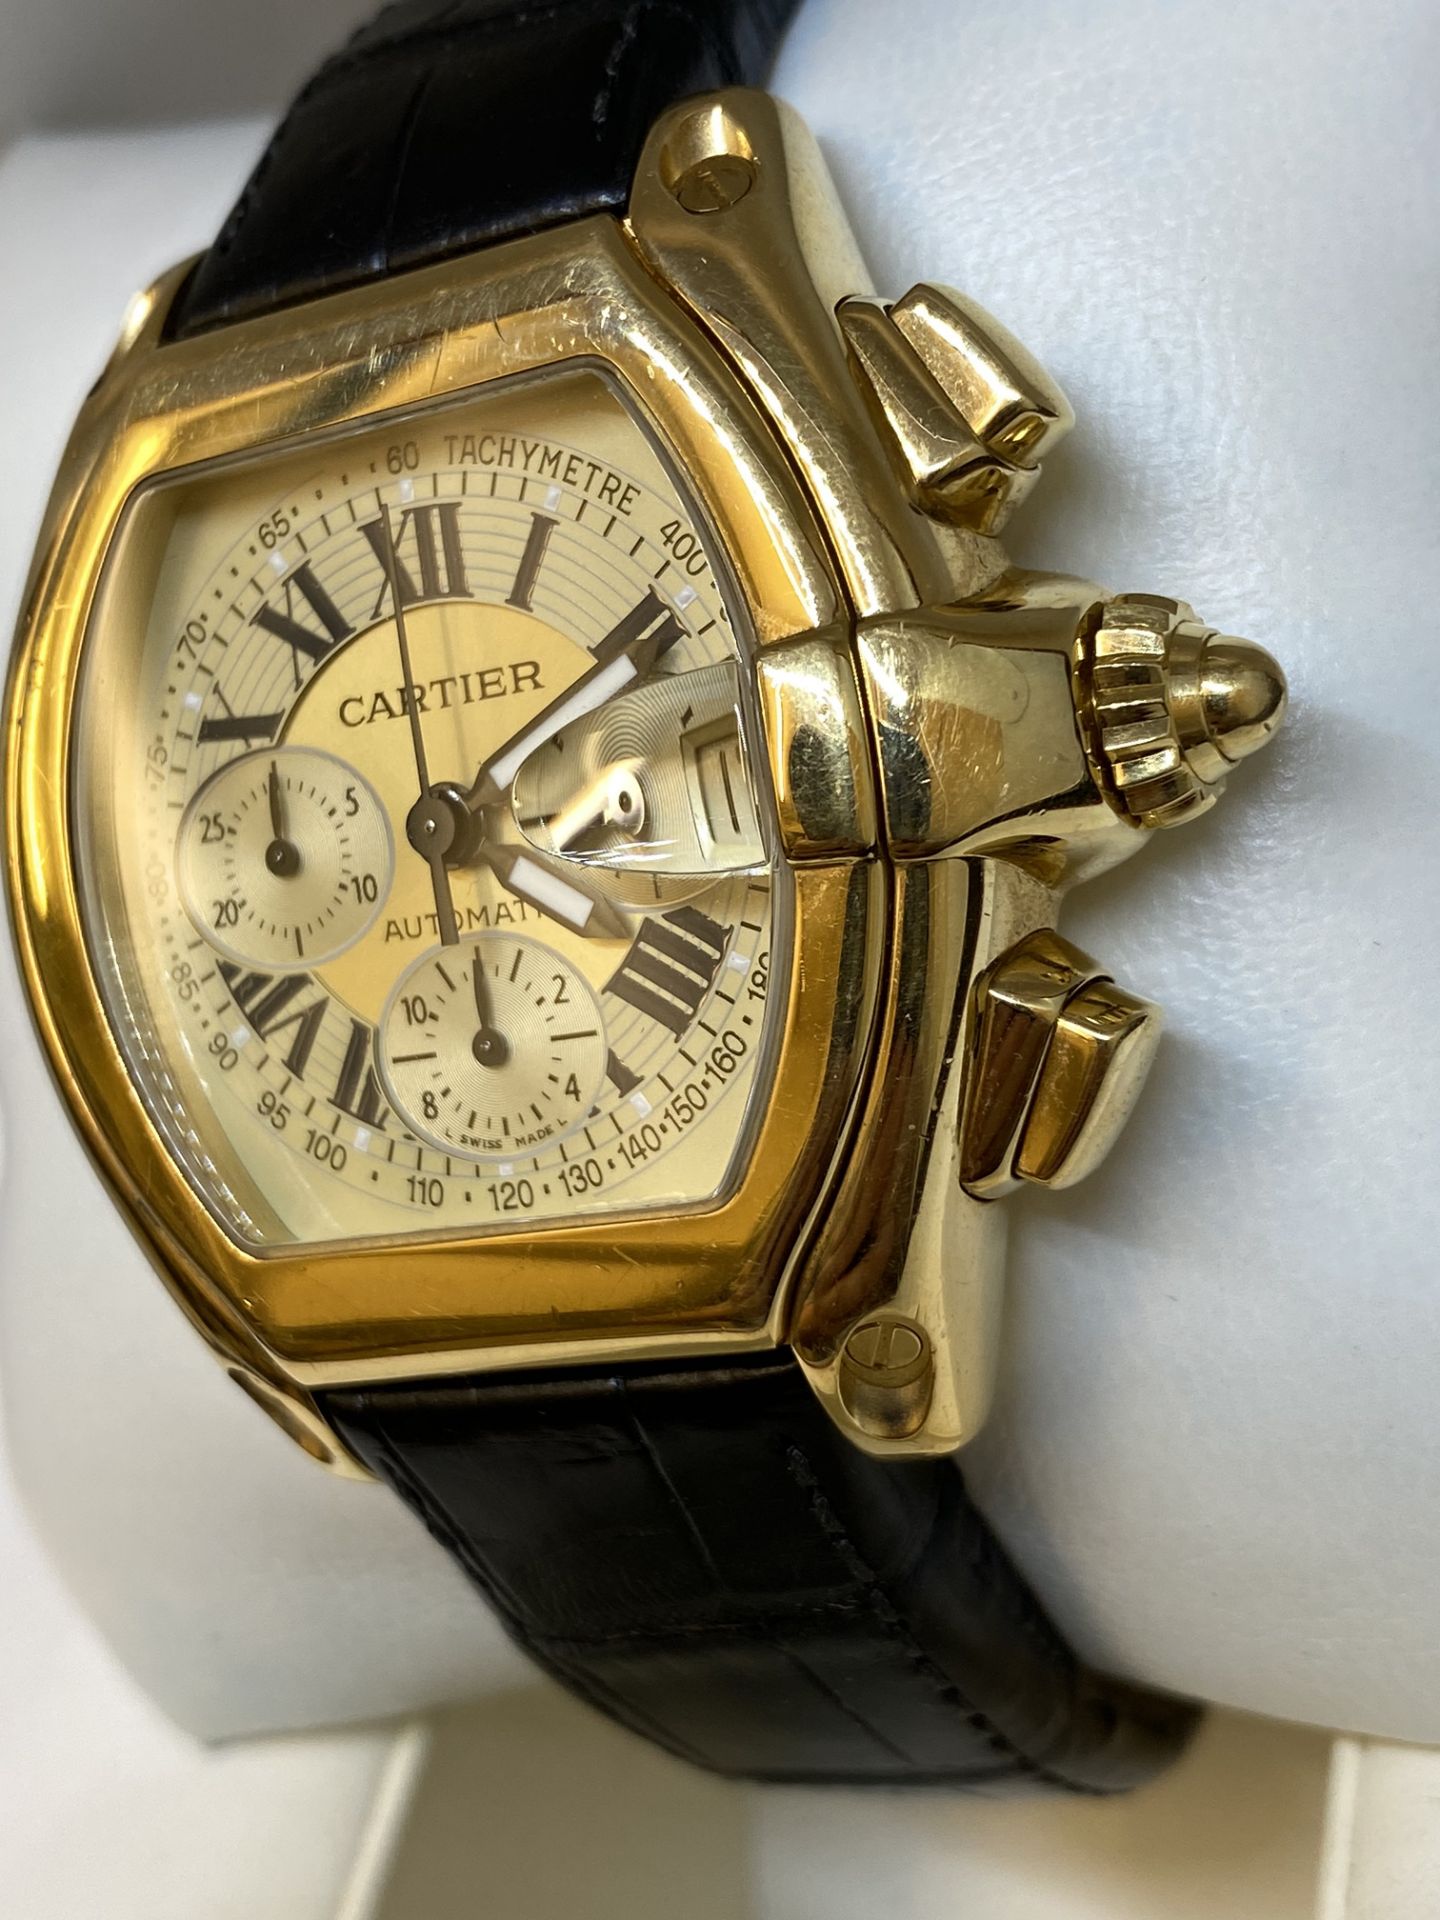 Cartier Roadster Xl Chronograph 2619 Yellow Gold 18k 48mm Automatic Watch with Box - Image 5 of 13